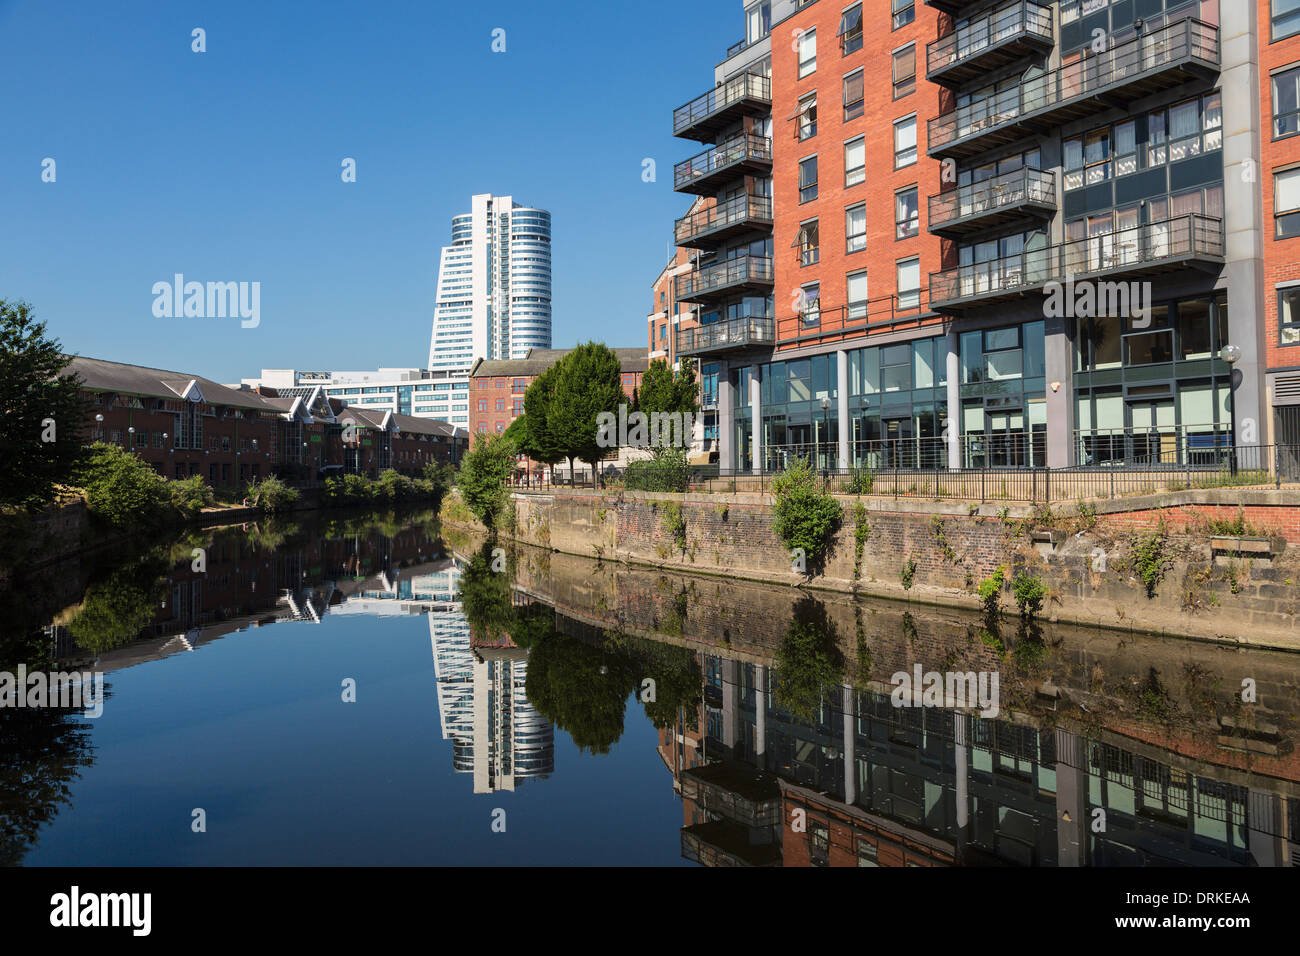 Bridgewater Place and riverside apartments River Aire, Leeds, England Stock Photo